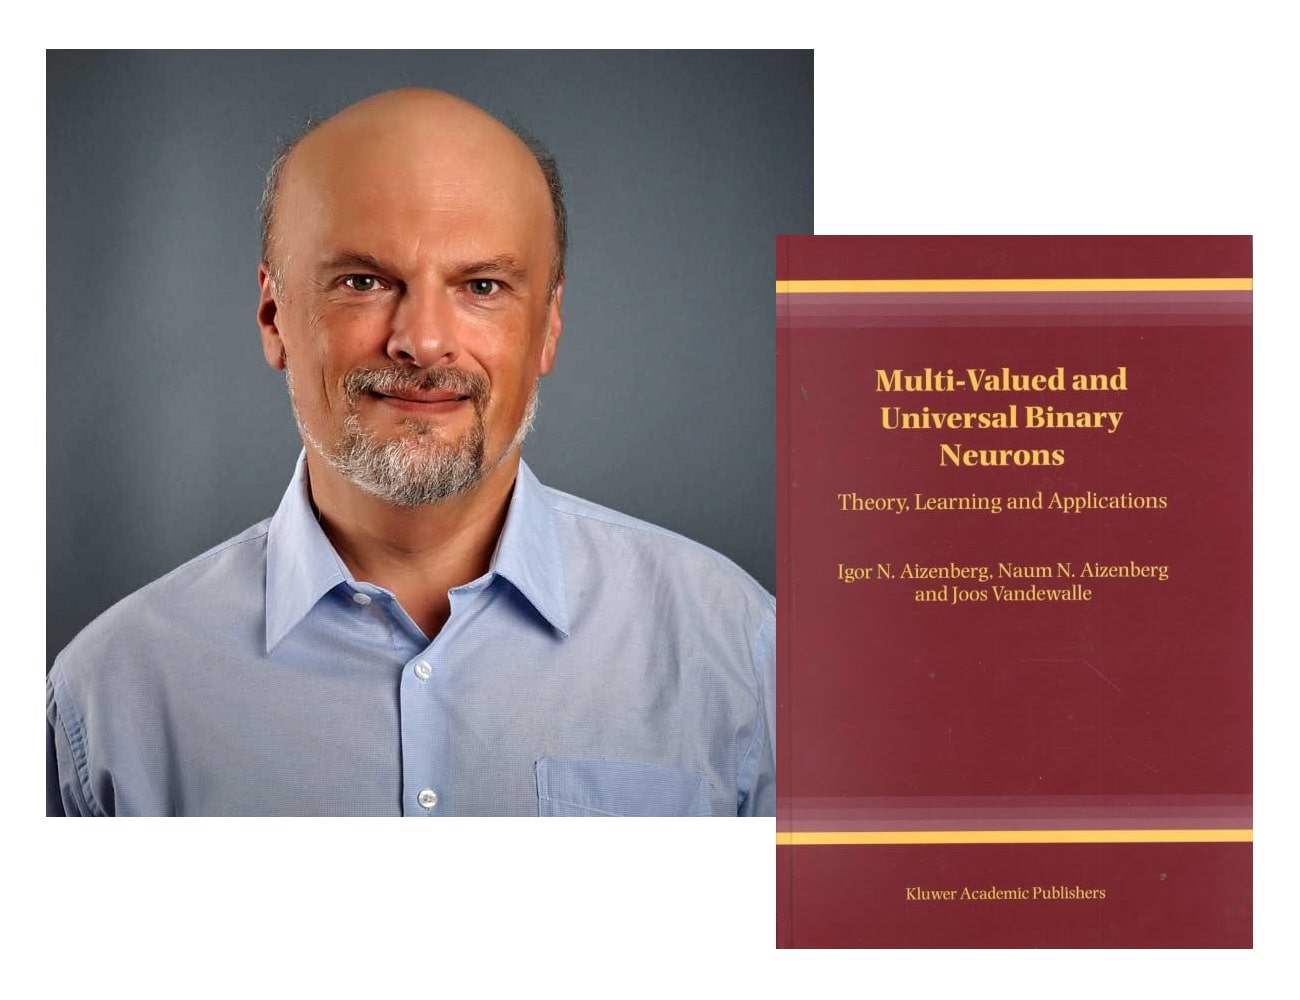 Igor Aizenberg, 'Multi-Valued and Universal Binary Neurons' Book Cover (2000)